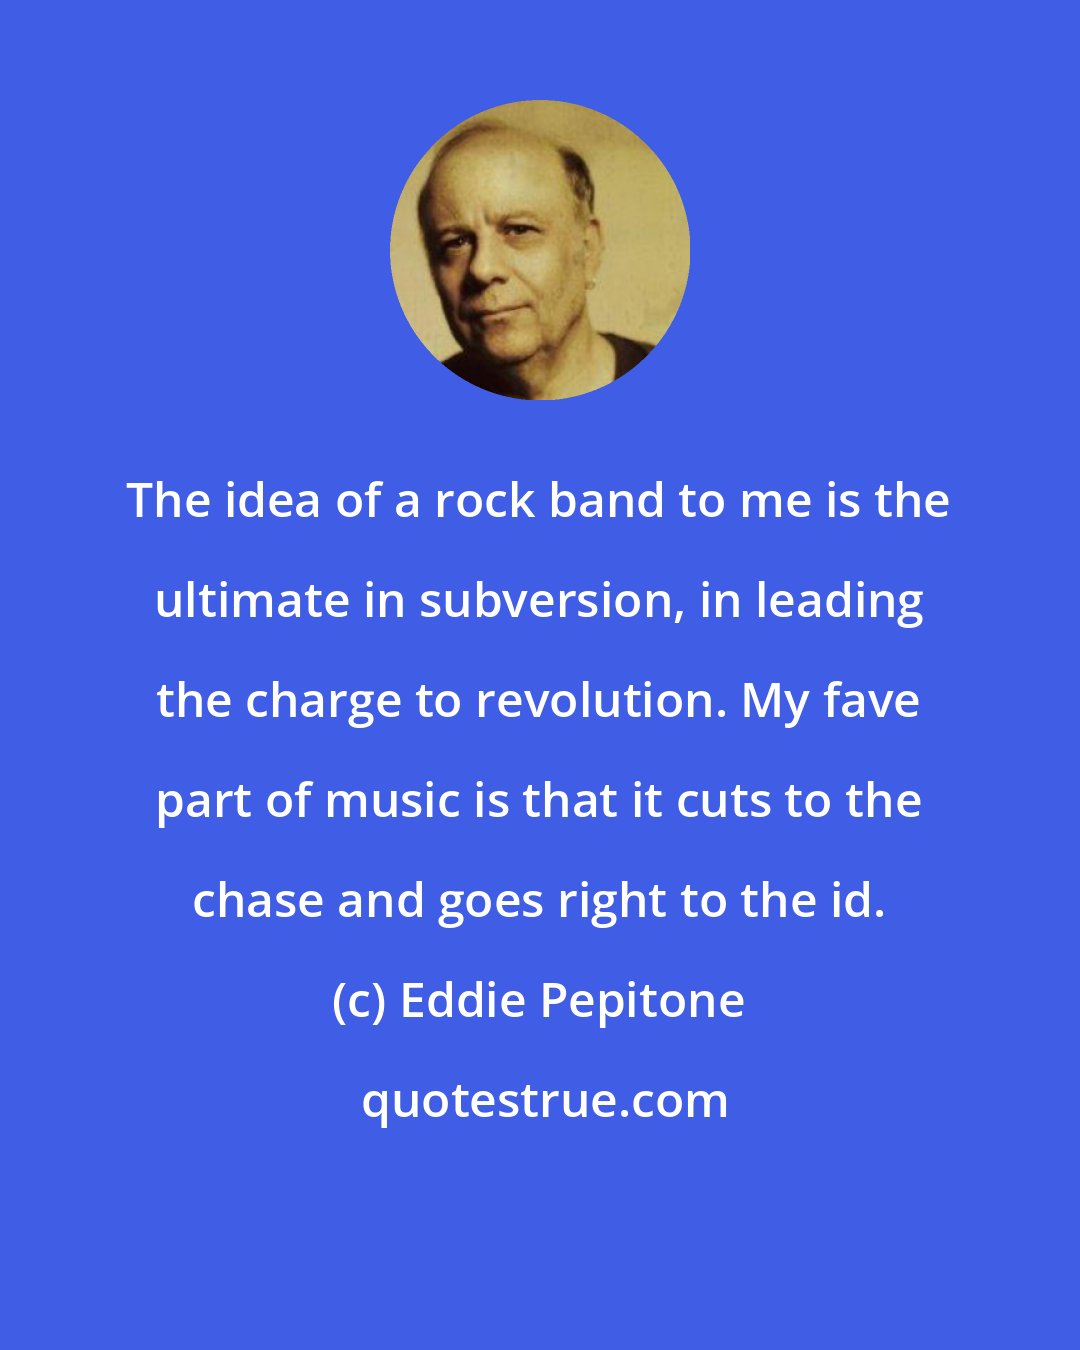 Eddie Pepitone: The idea of a rock band to me is the ultimate in subversion, in leading the charge to revolution. My fave part of music is that it cuts to the chase and goes right to the id.